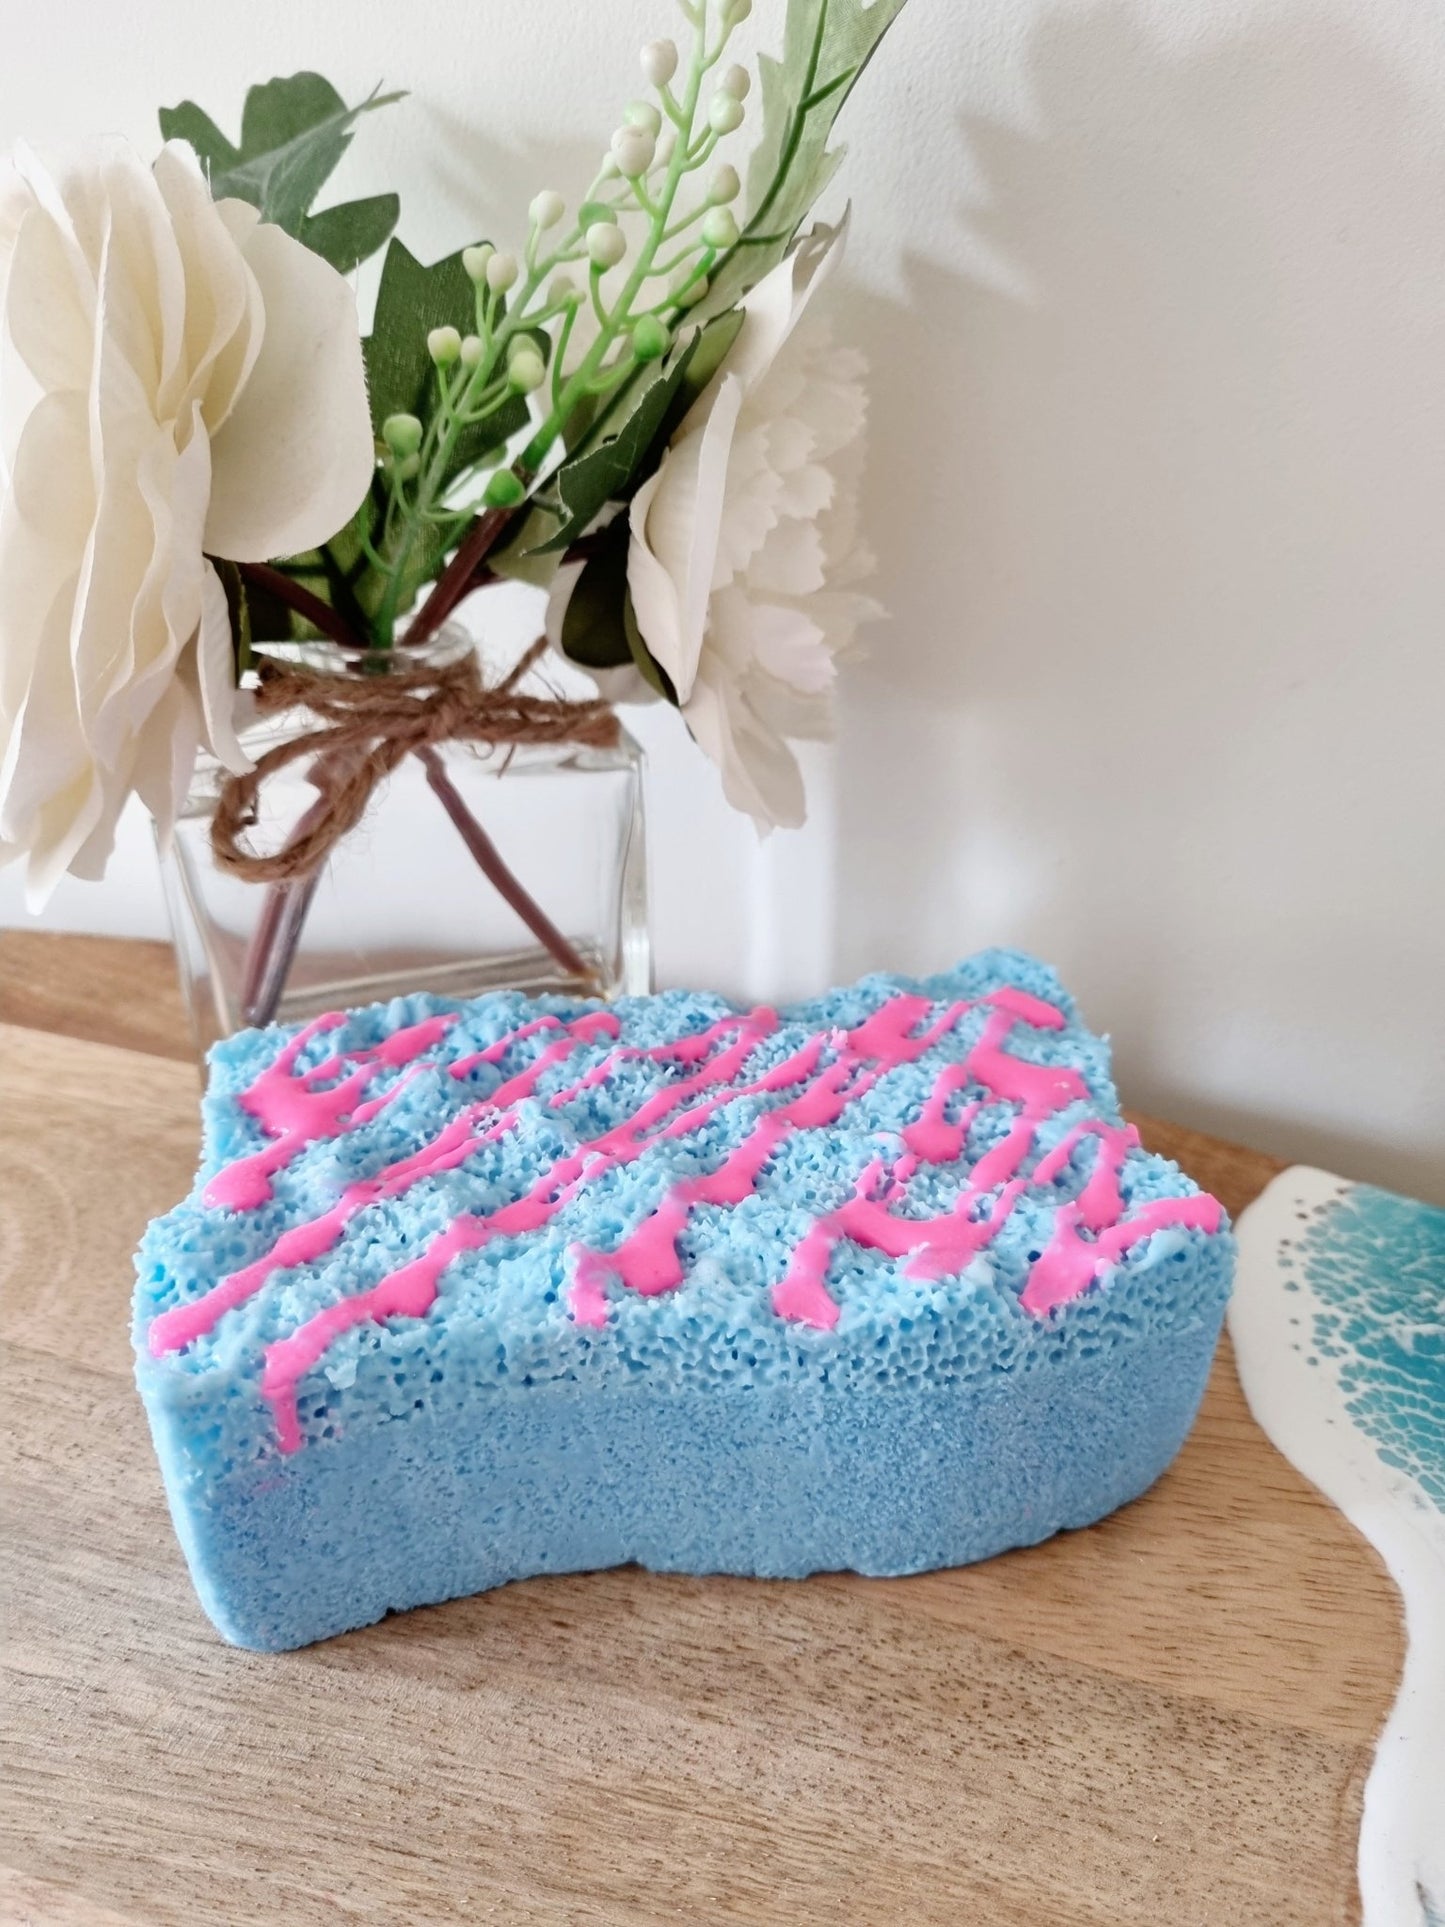 REDUCED TO CLEAR - Wavy Soap Infused Exfoliating Massage Sponge - Soap Sponge - Cottage Fresh Scents